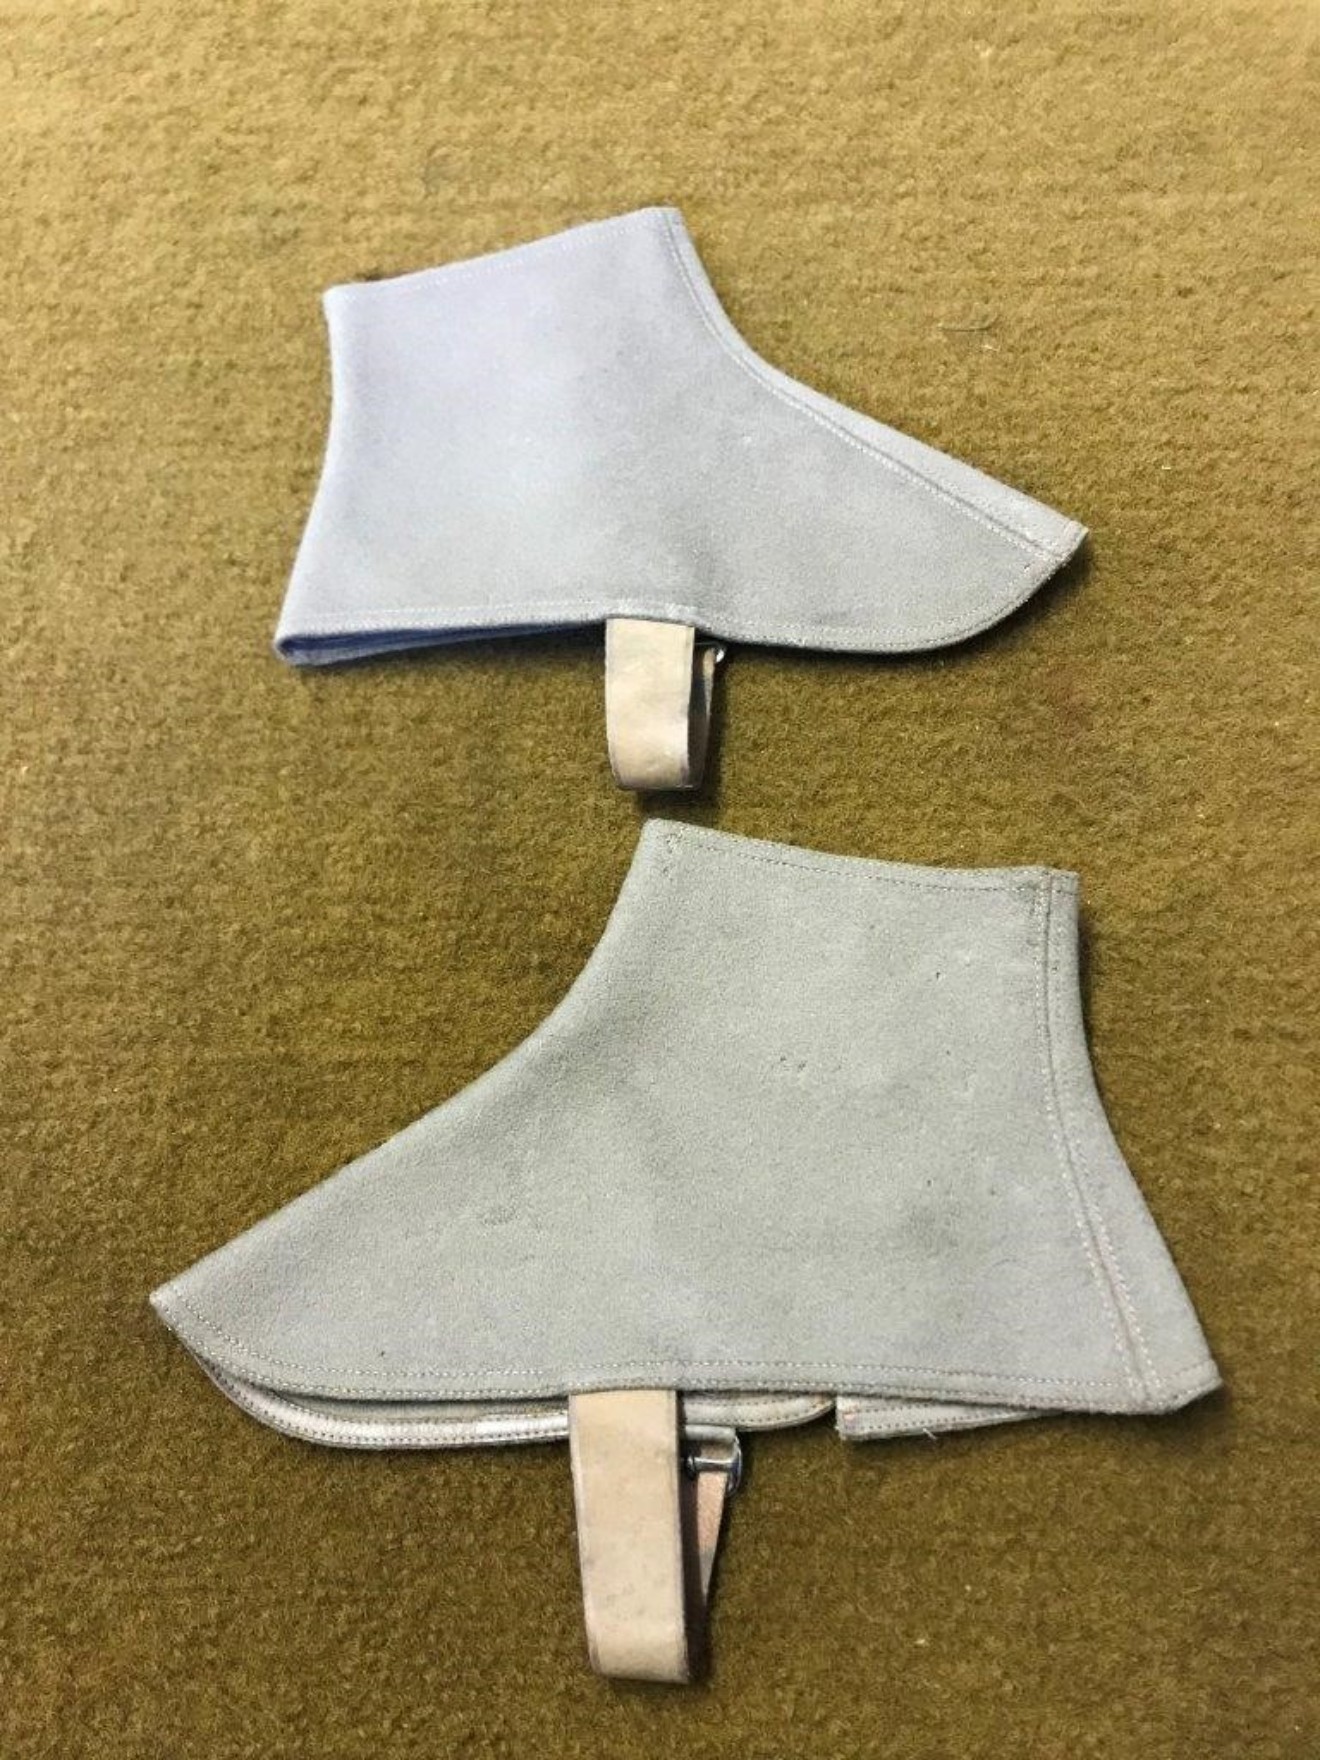 Antique Pair of Felt Ankle Gaiters Buttoned on the Inner Legs and Secured with Leather Straps